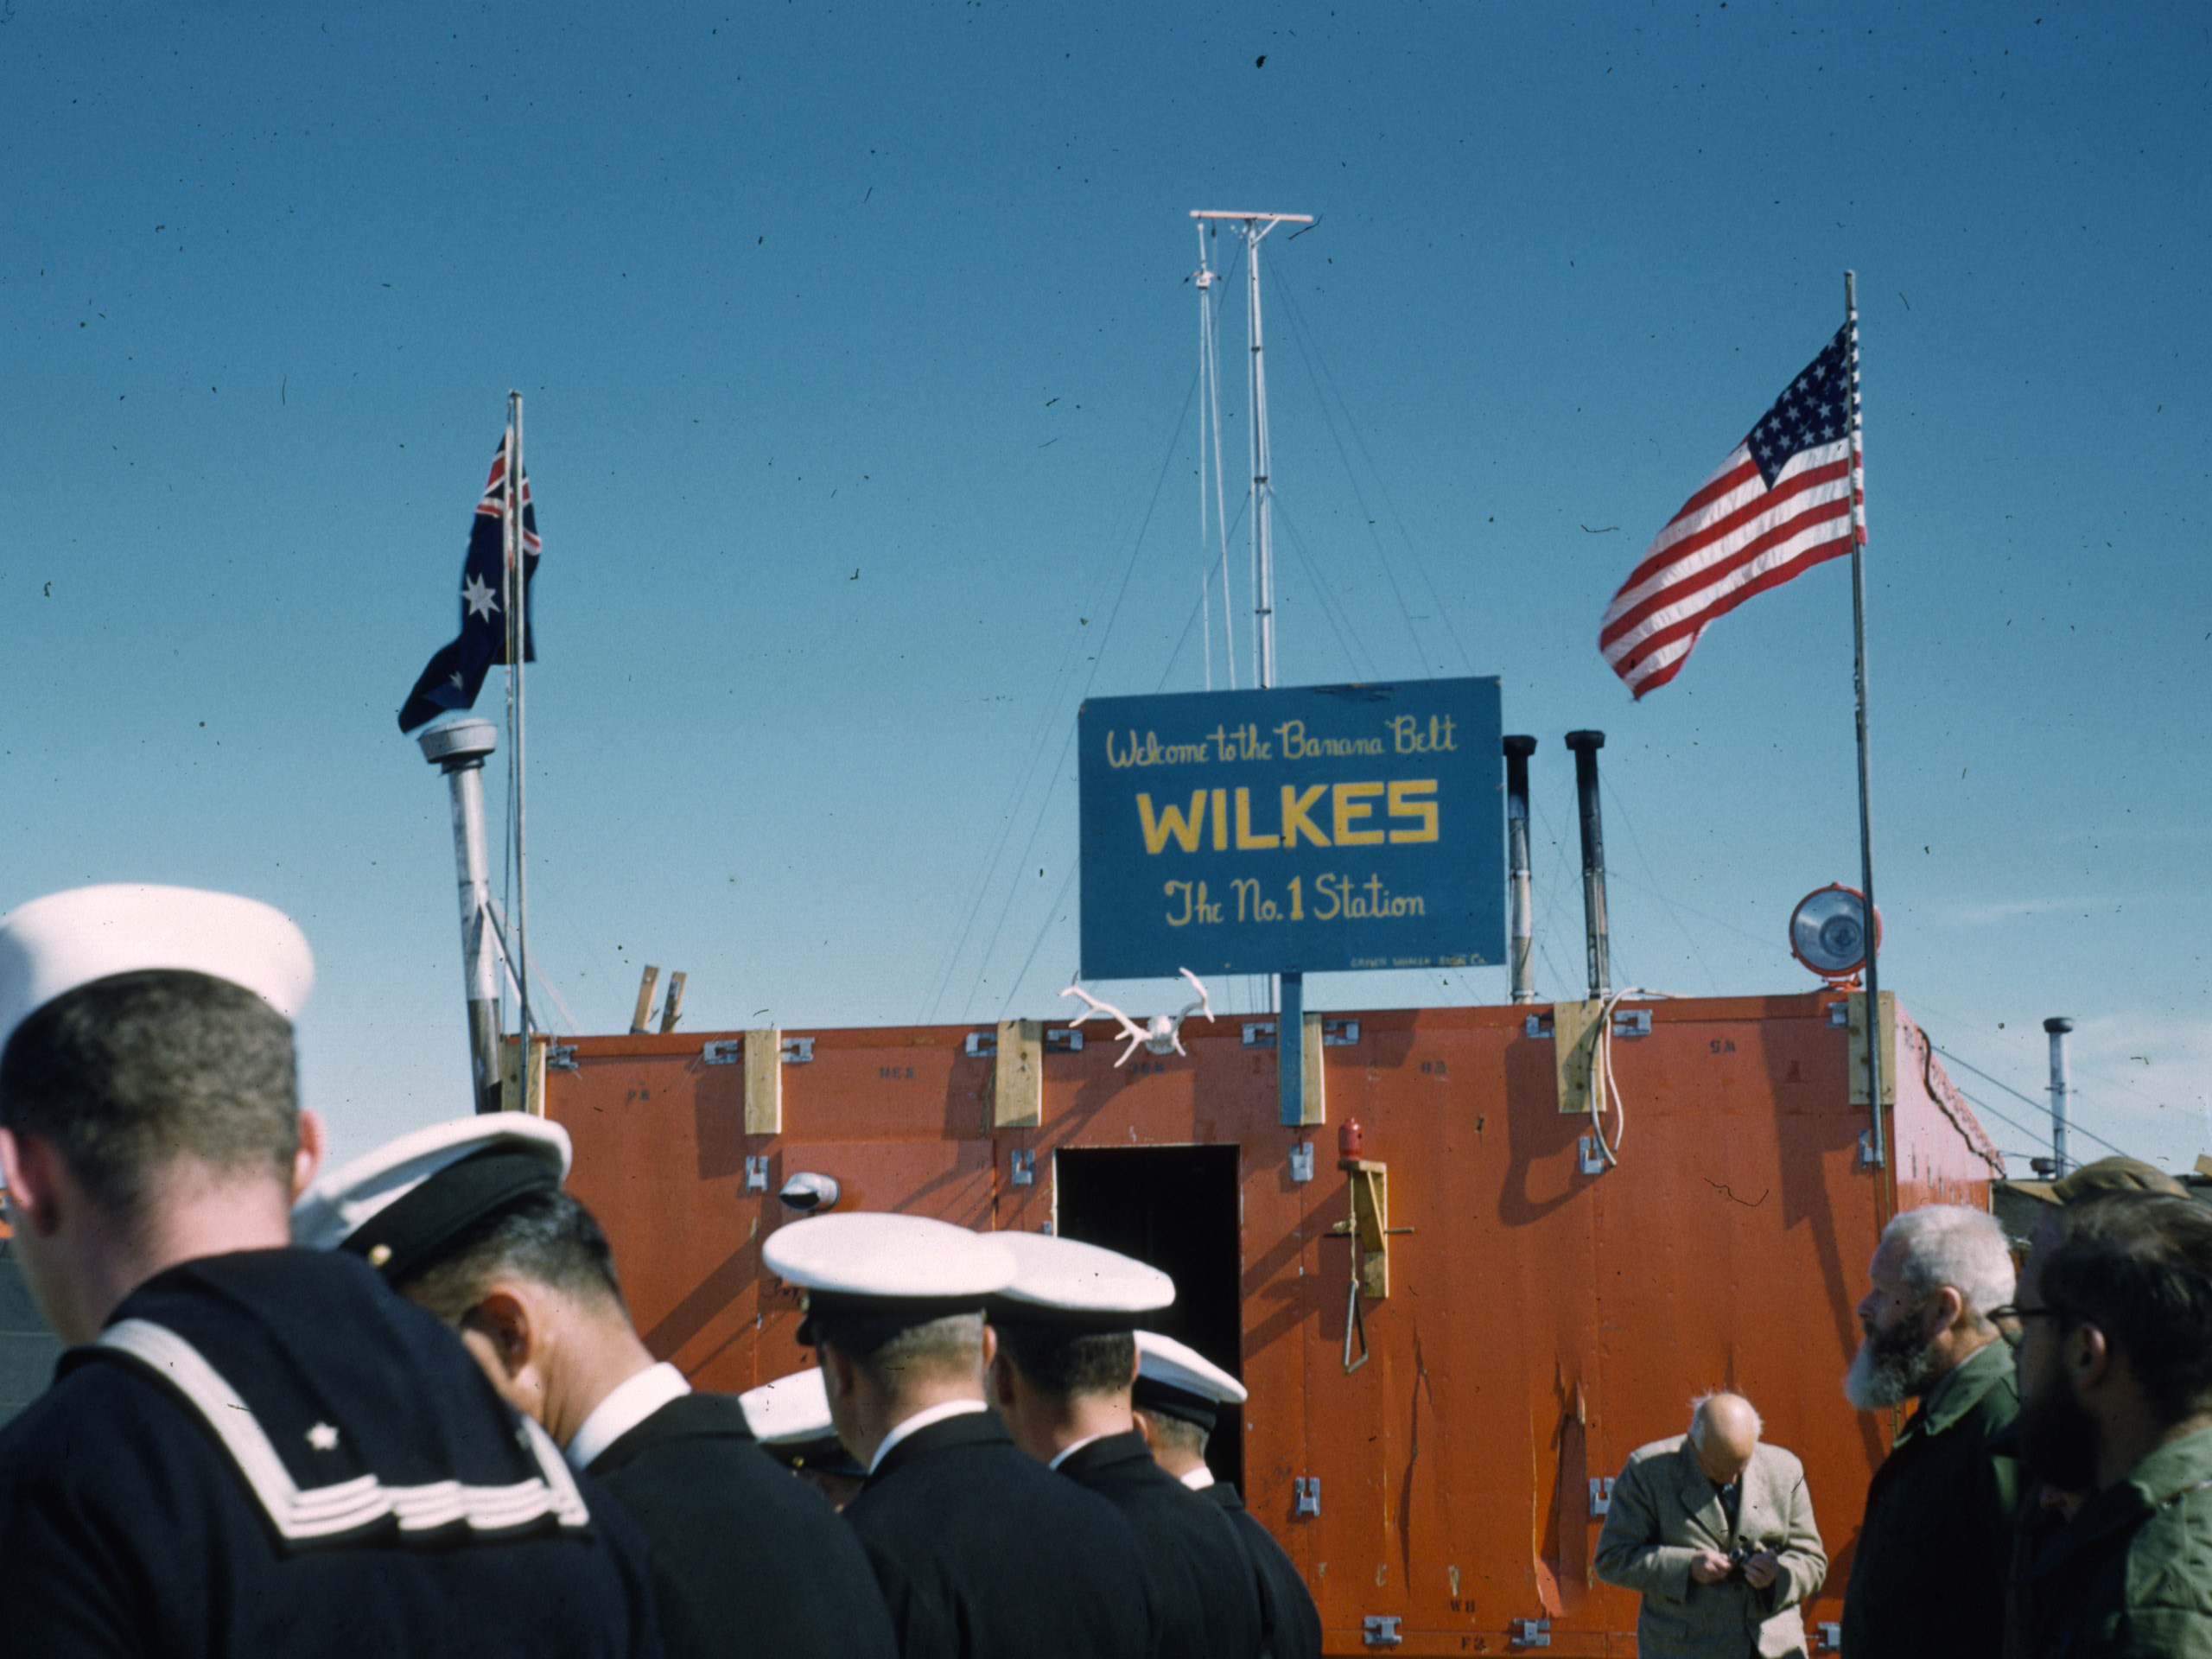 US Navy sailors stand in front of a building.